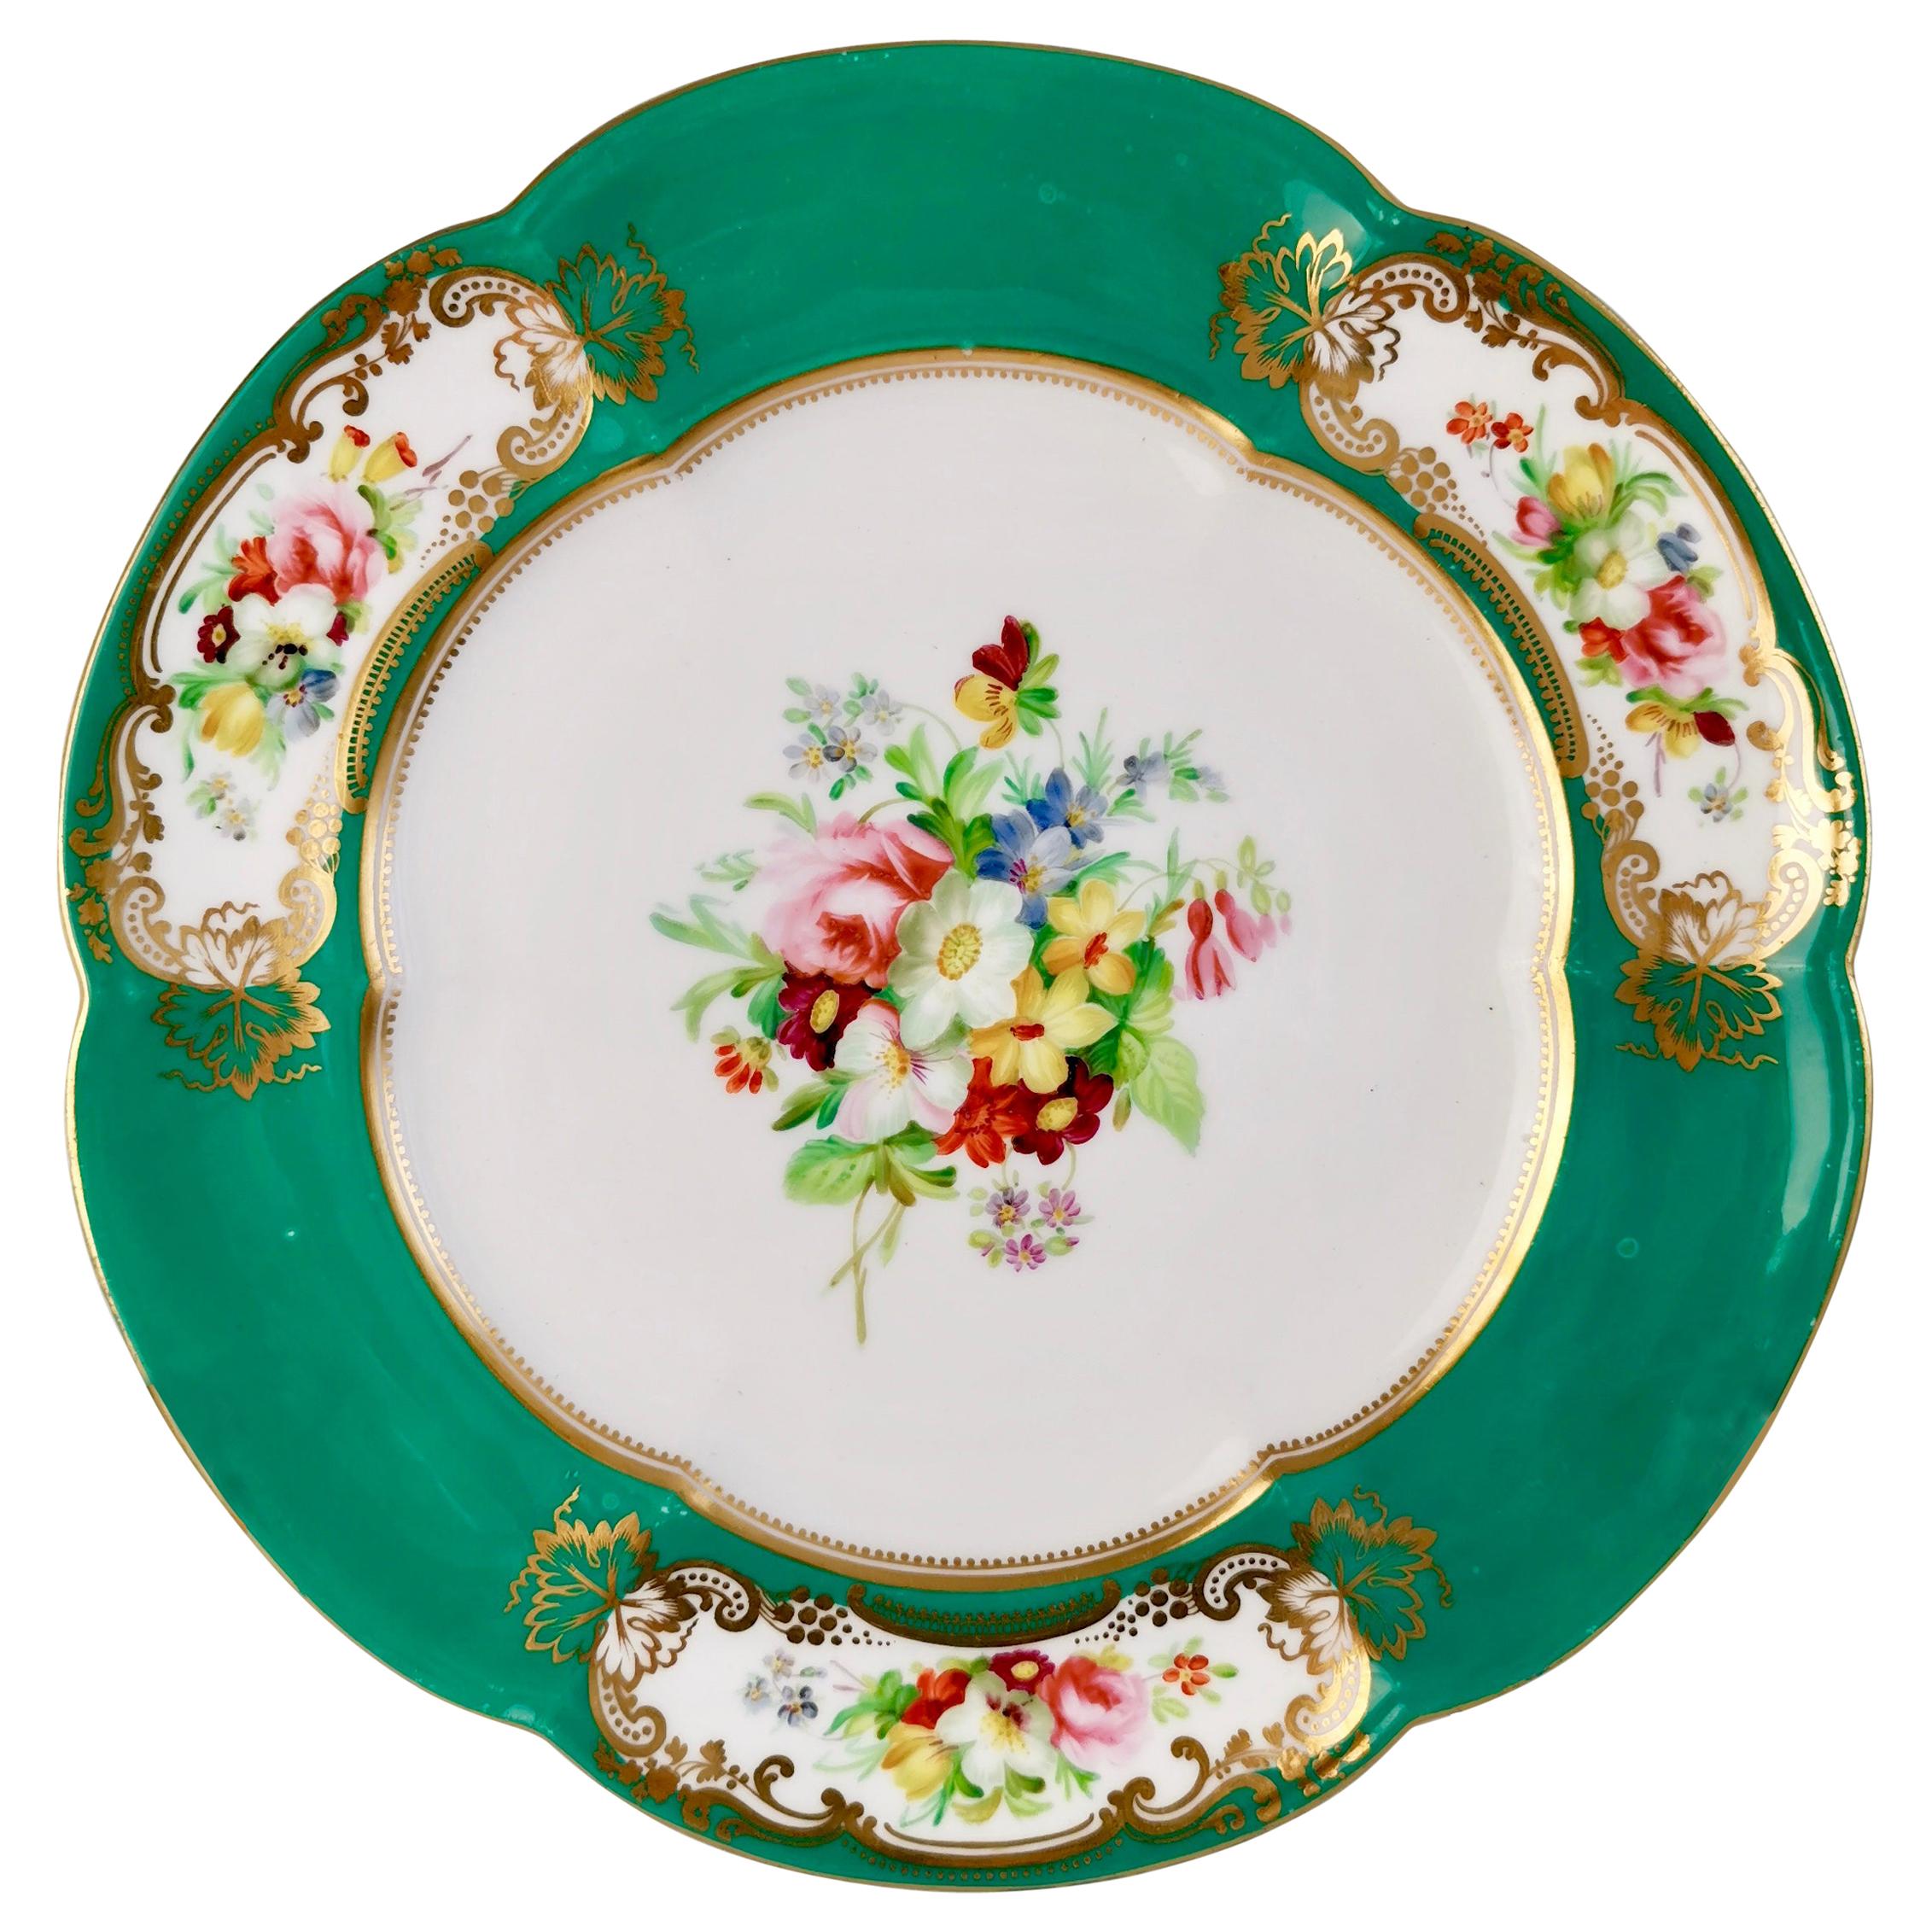 Coalport Dessert Plate, 6-Lobed Teal with Hand Painted Flowers, circa 1860